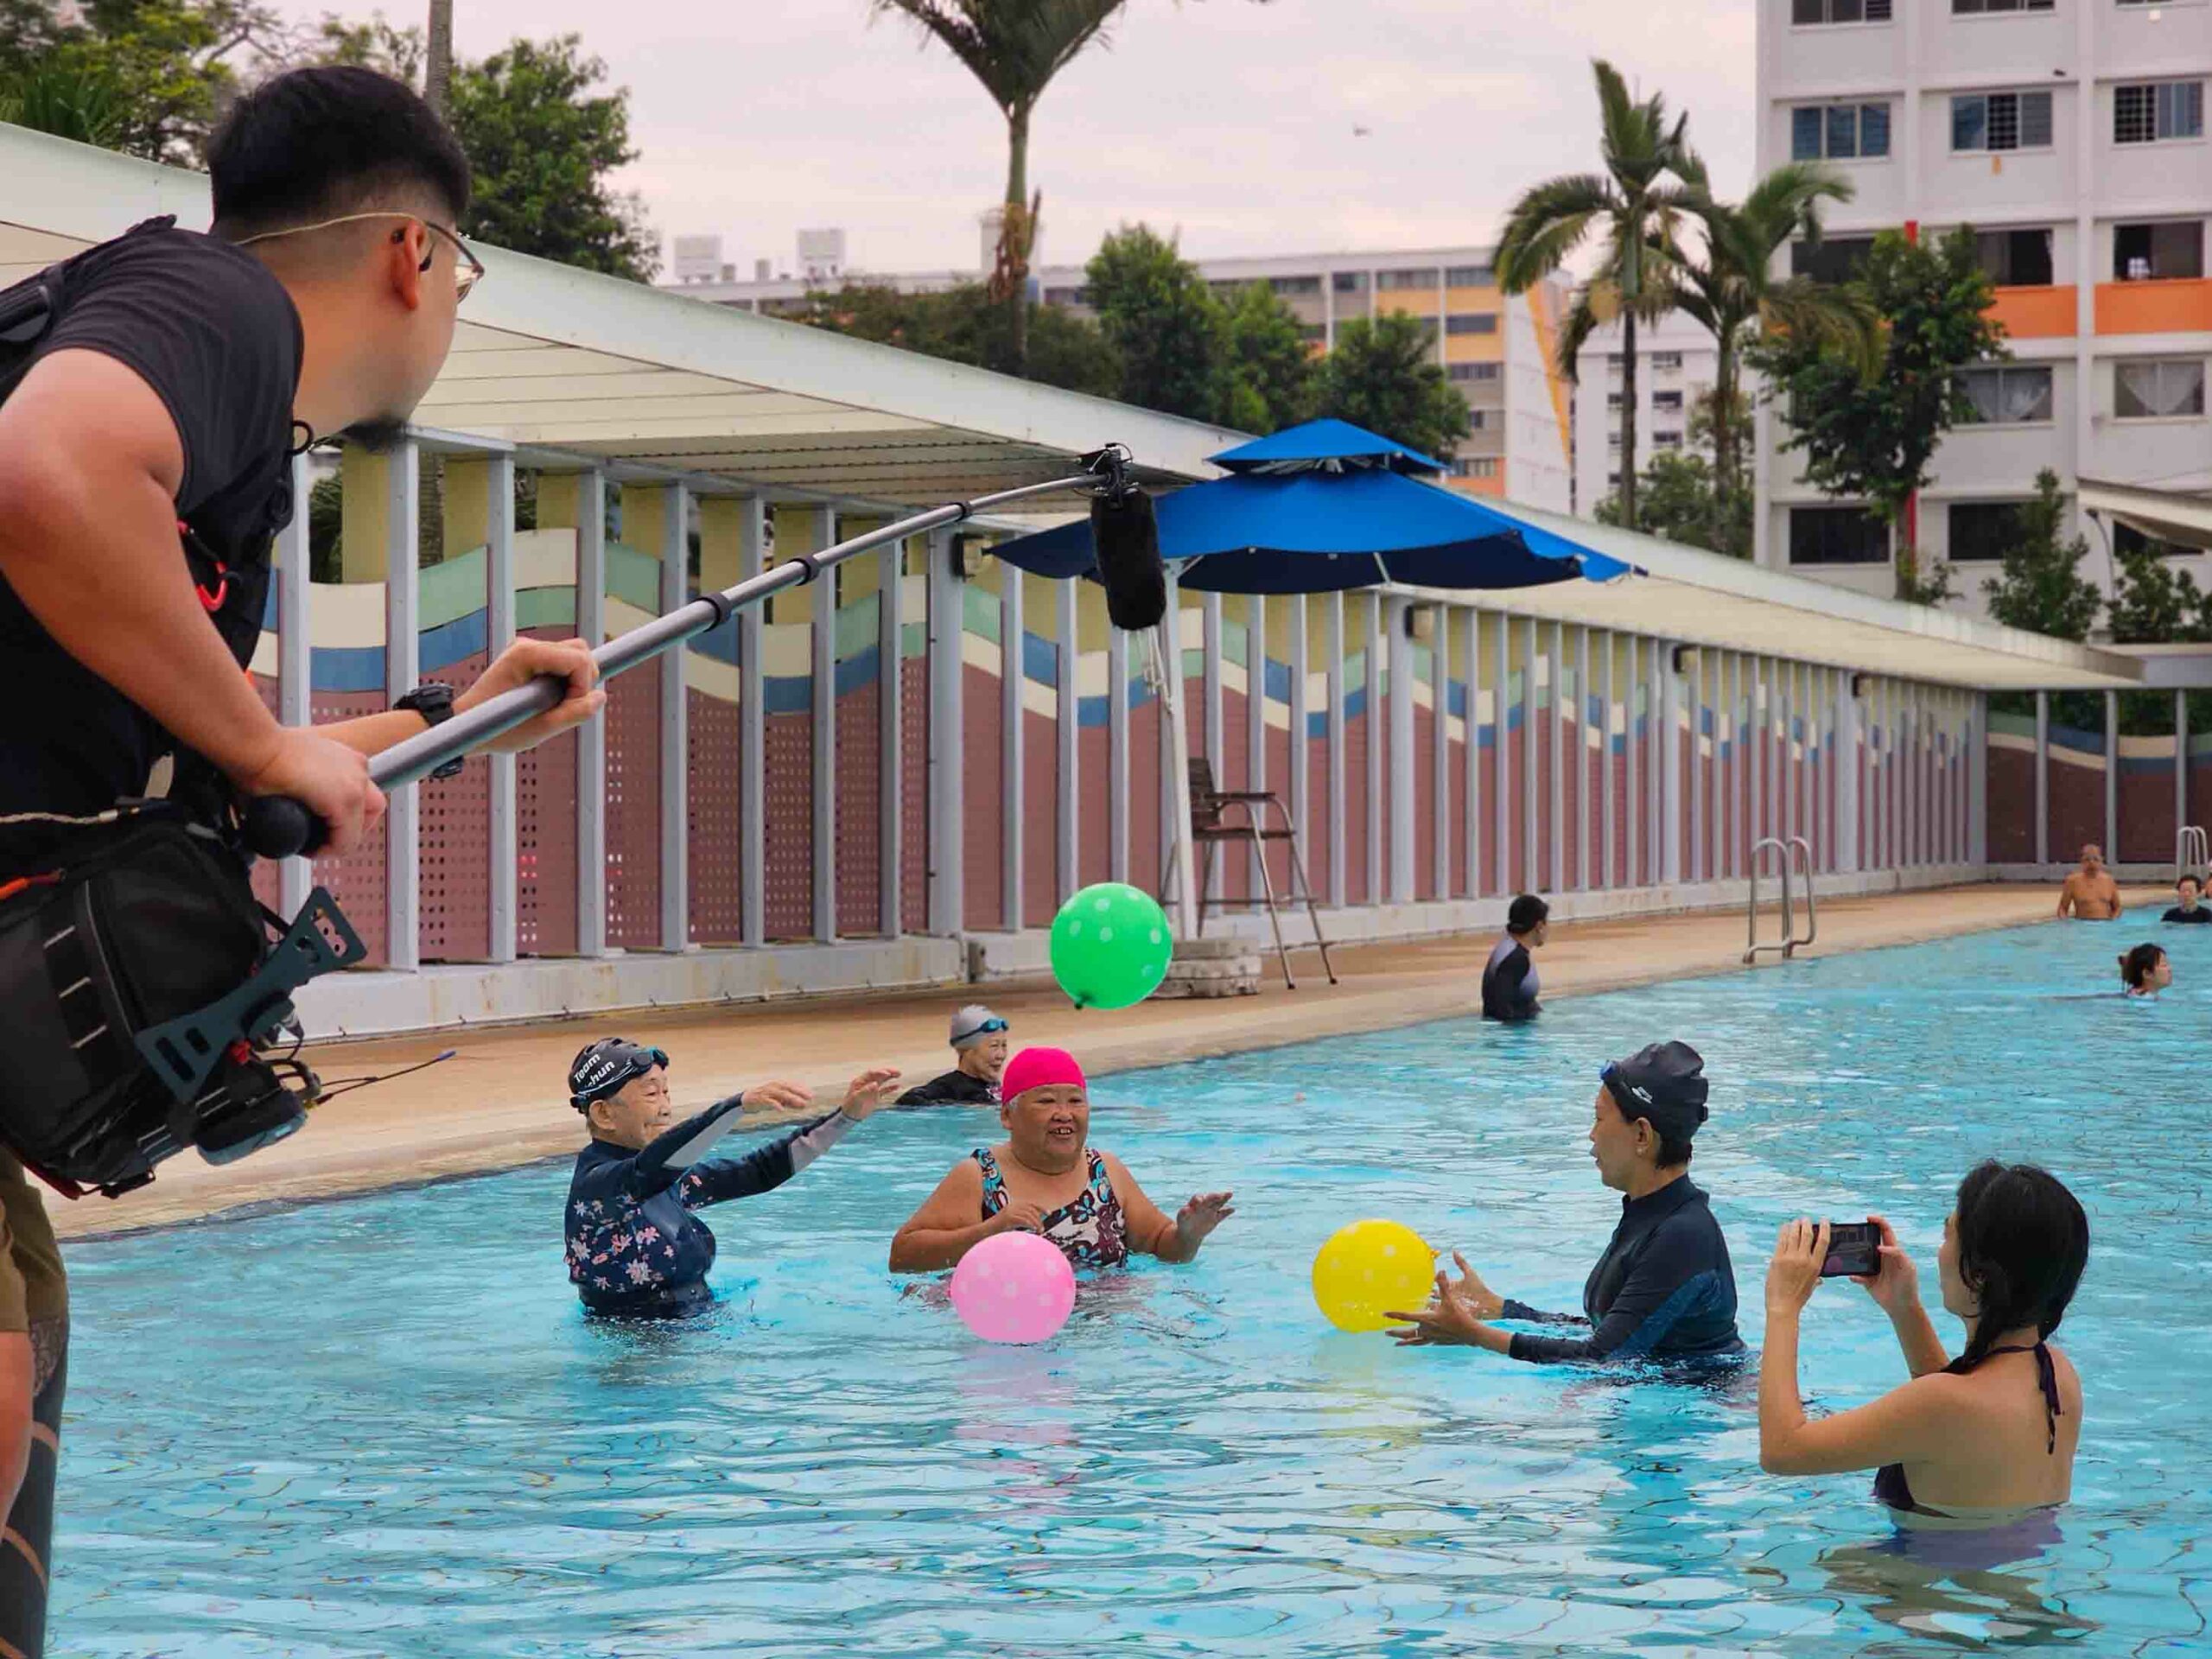 Yim Fong, Michelle, Tong Cheng and Salty in the pool with balloons as a boom operator holds a mic overhead.